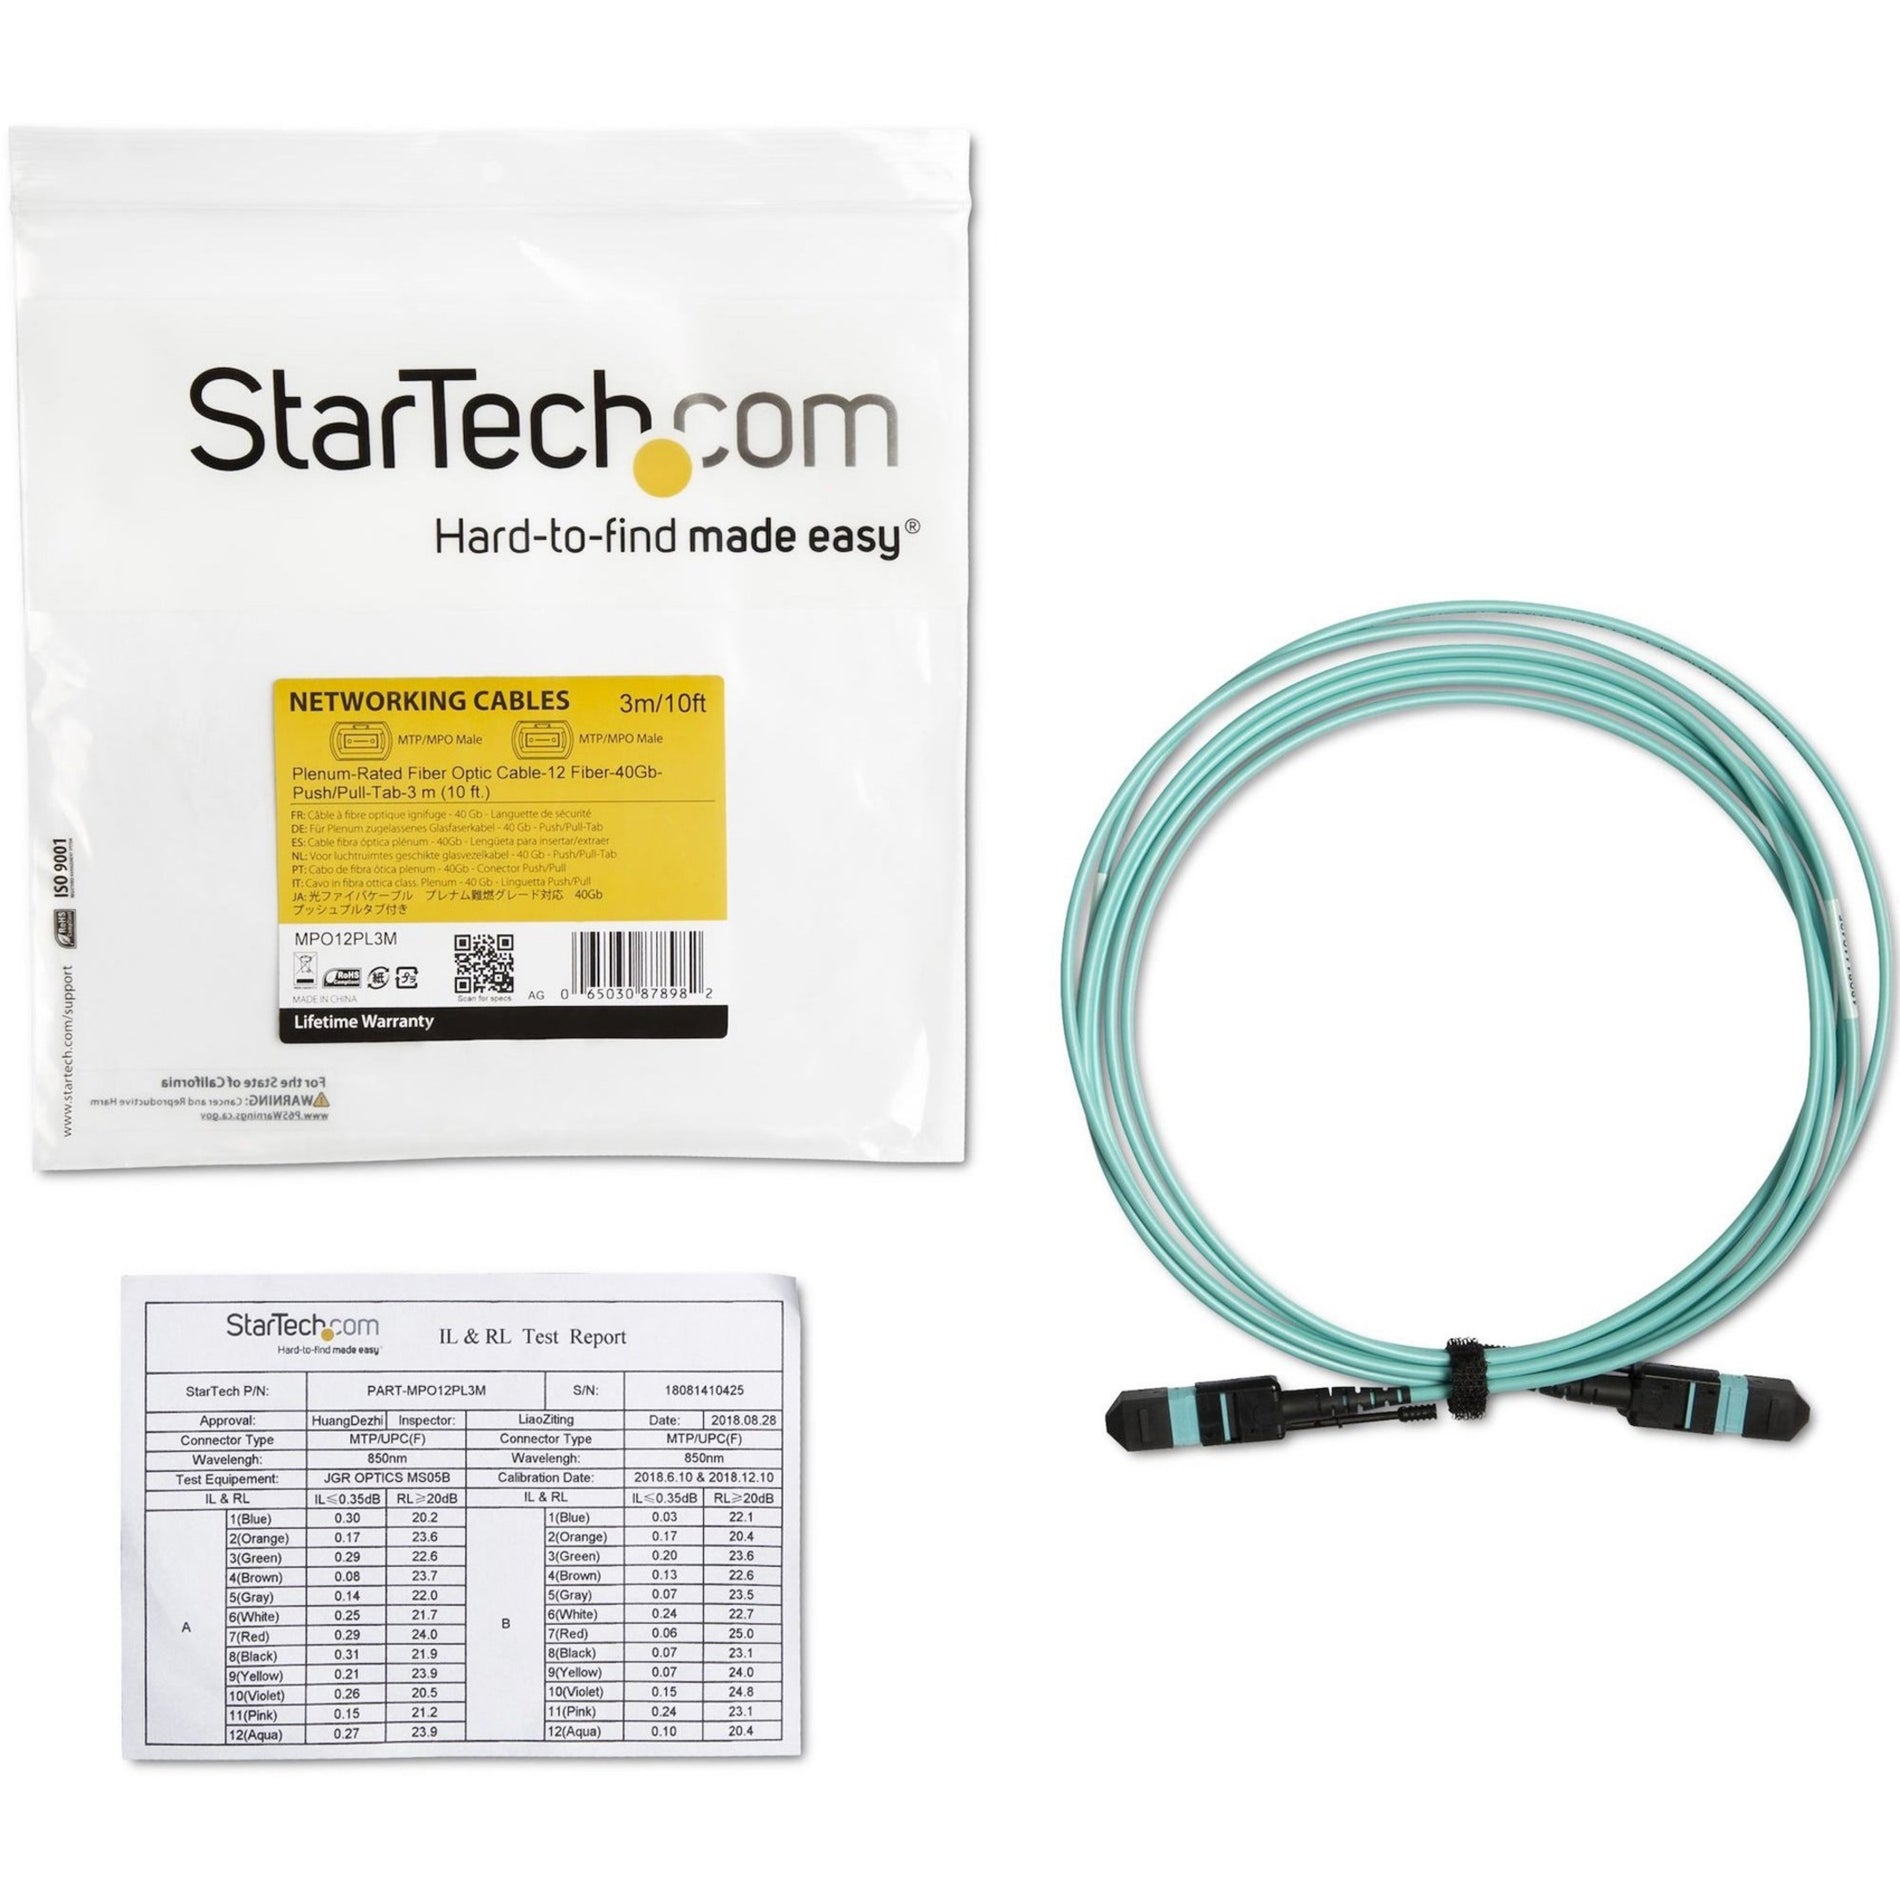 StarTech.com MPO12PL3M Fiber Optic Network Cable, 10 ft - Plenum-Rated MTP to MTP Cable, OM3, 40G MPO Cable